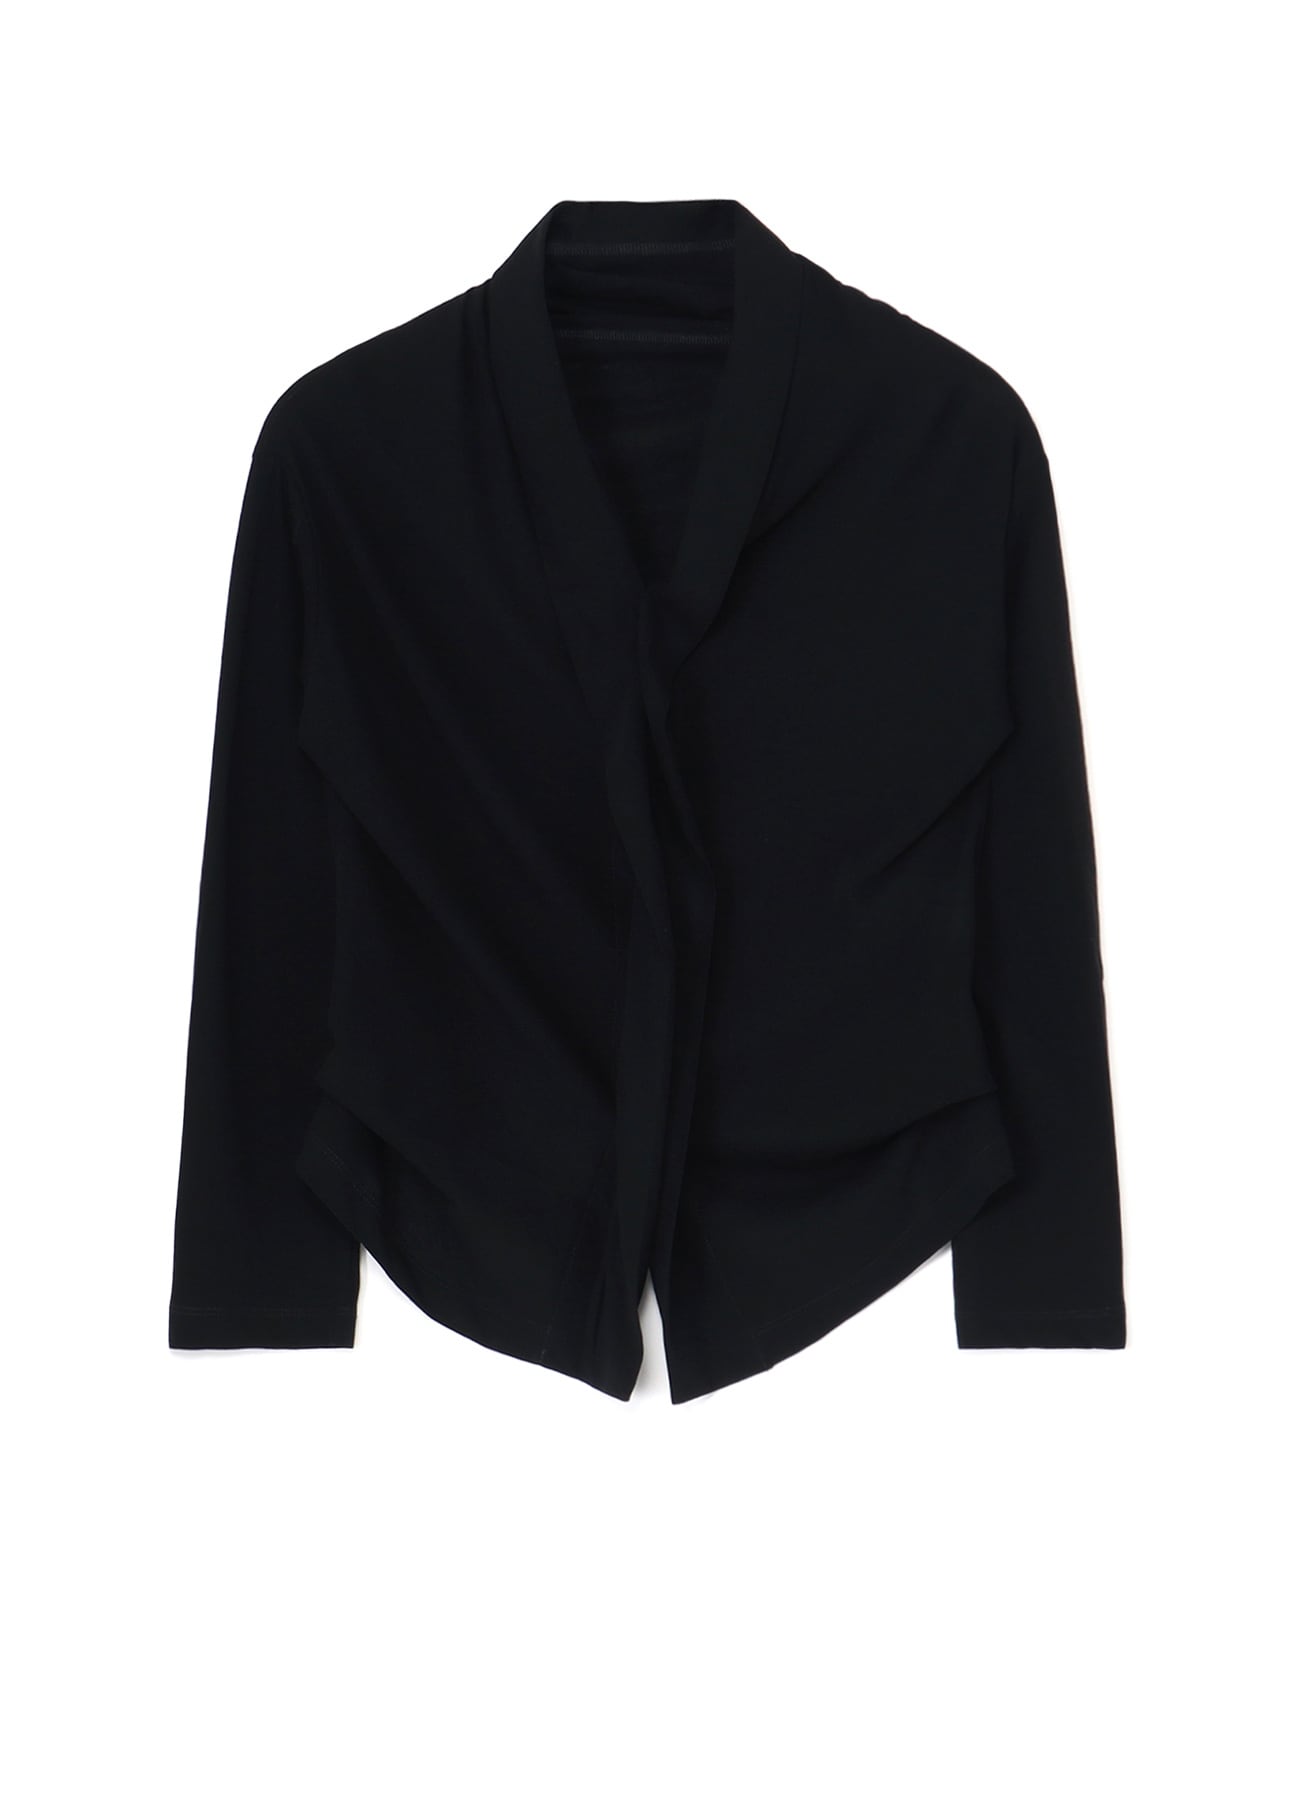 HARD TWISTED JERSEY SIDE TUCKED 4-BUTTON CARDIGAN(S Black): Y's 